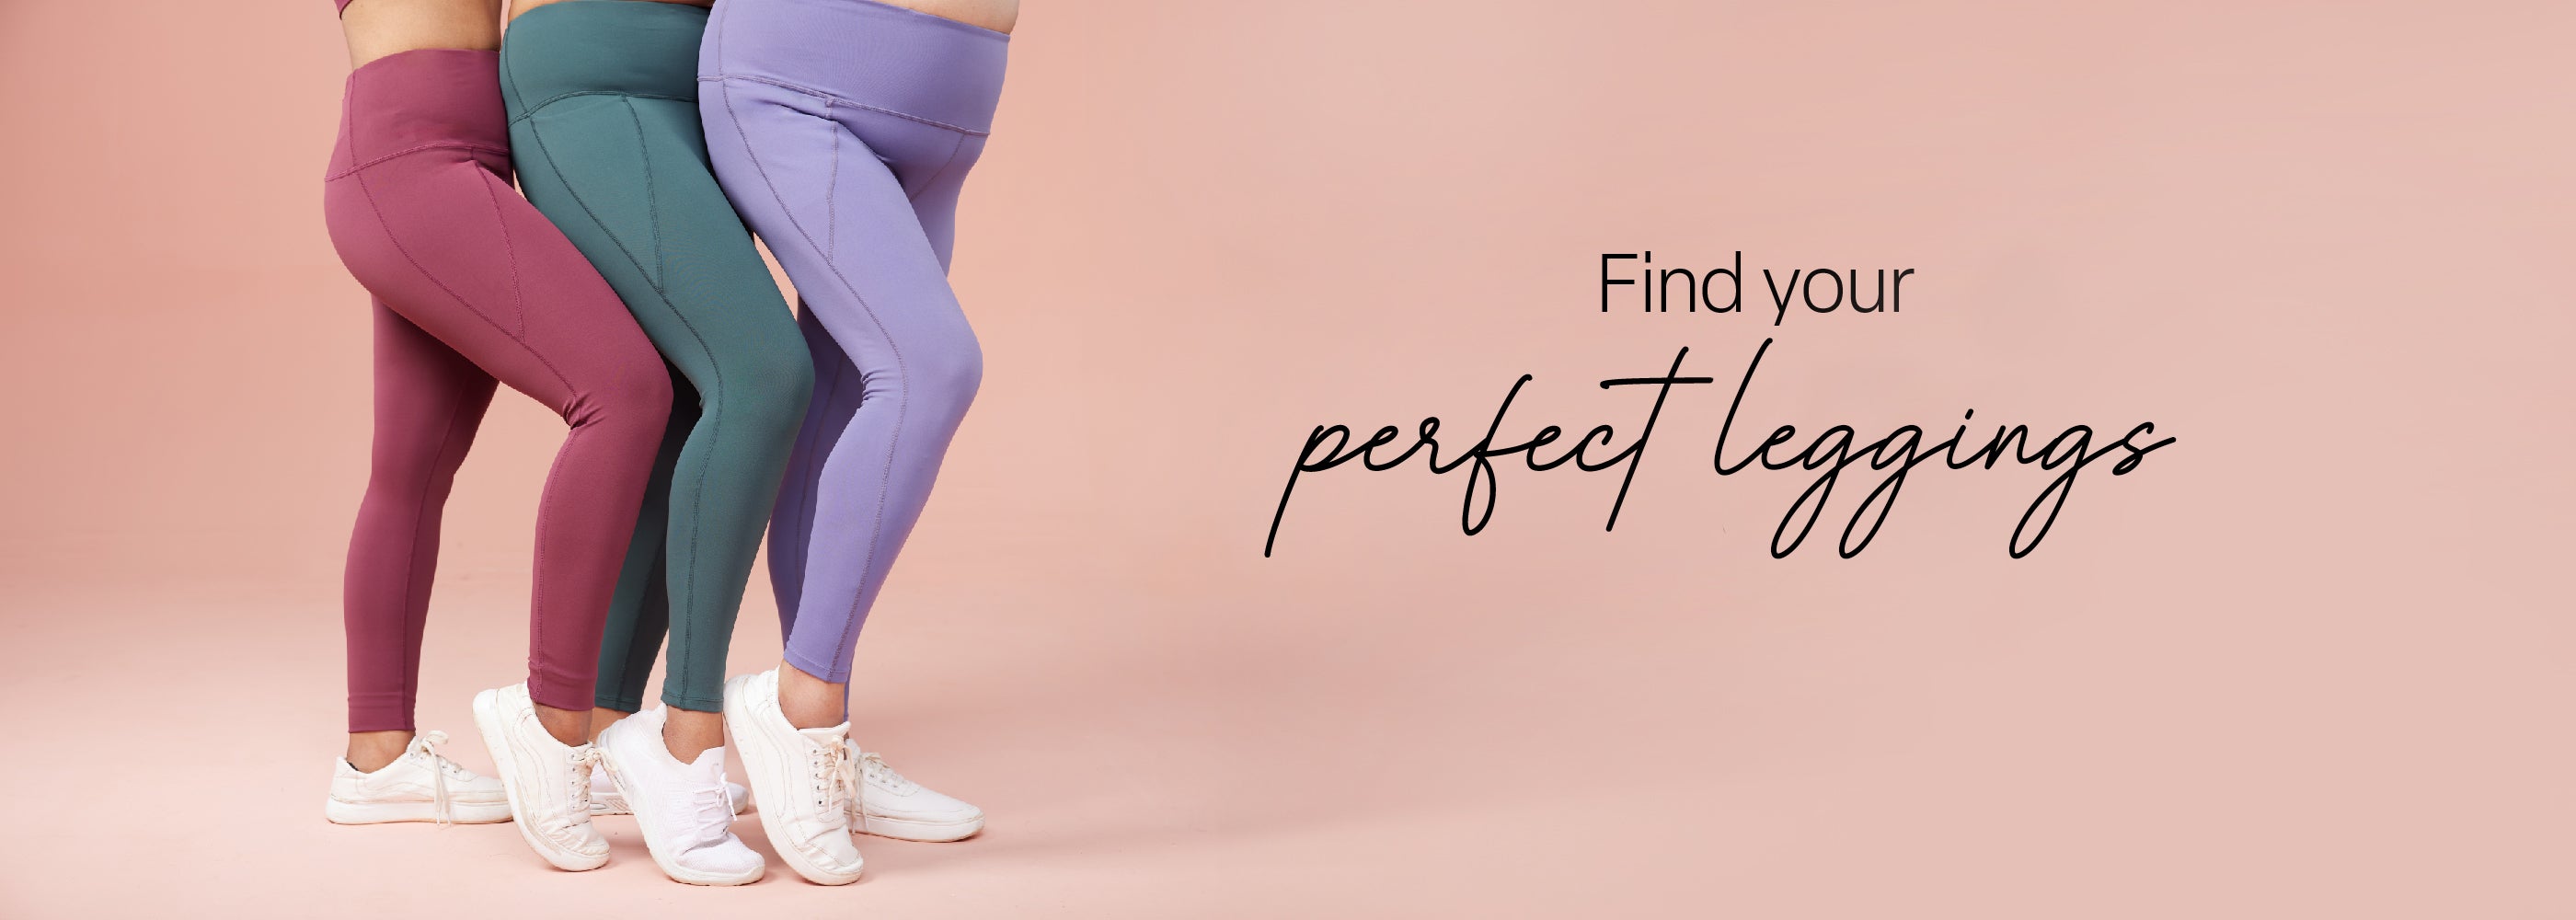 What are the differences between yoga leggings and seamless legging? - Quora